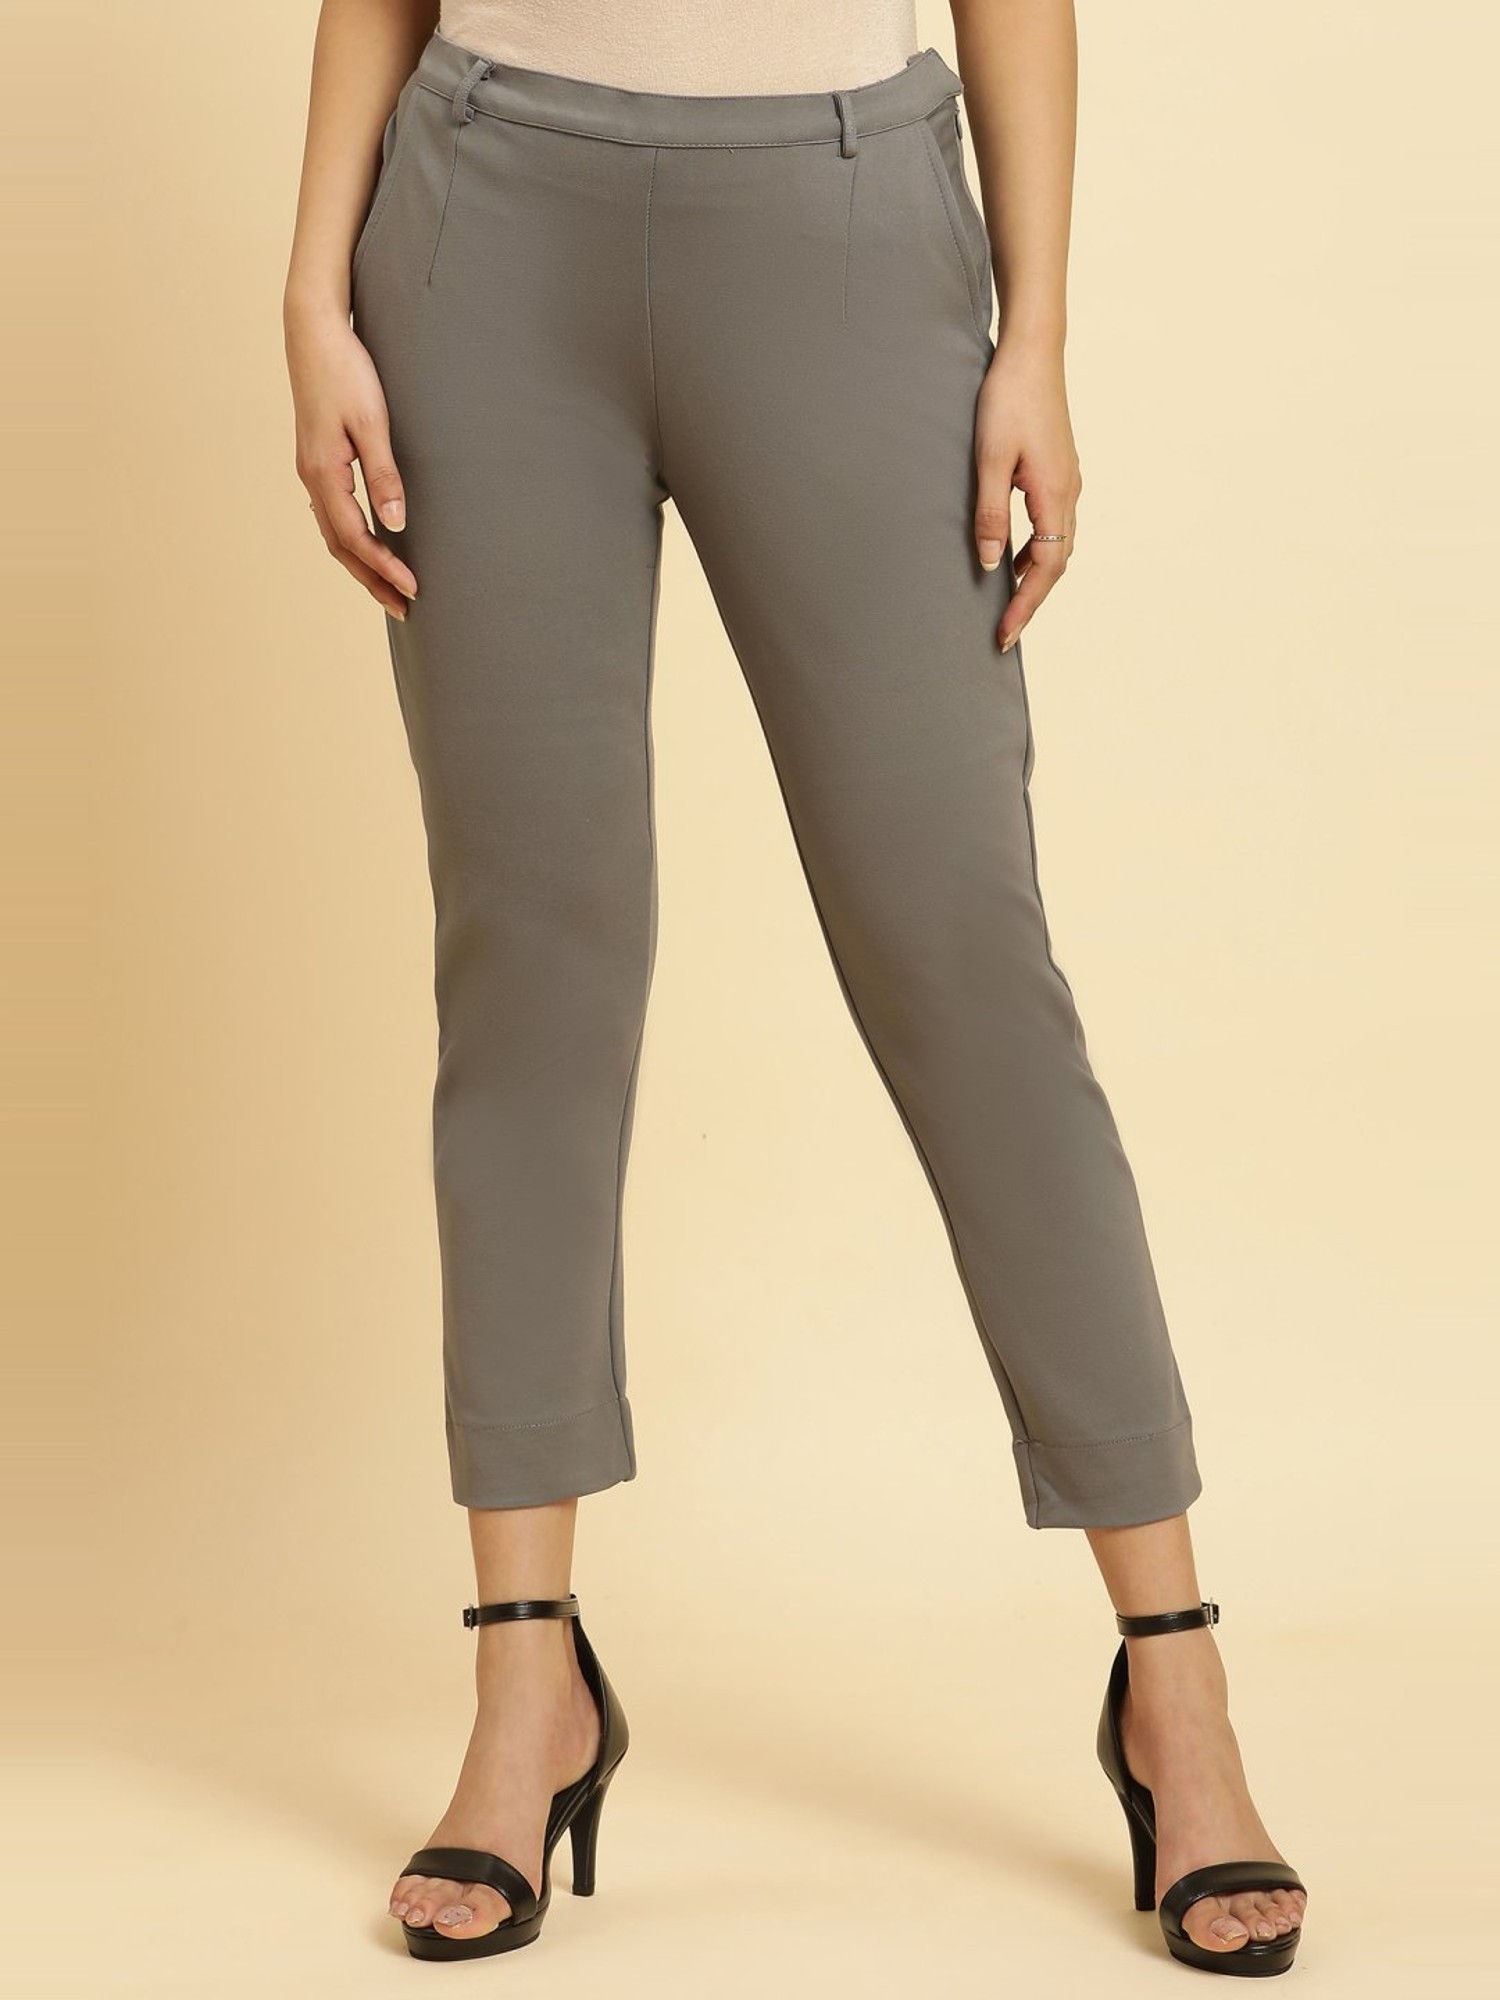 Women's High-rise Slim Fit Cropped Kick Flare Pull-on Pants - A New Day™ :  Target